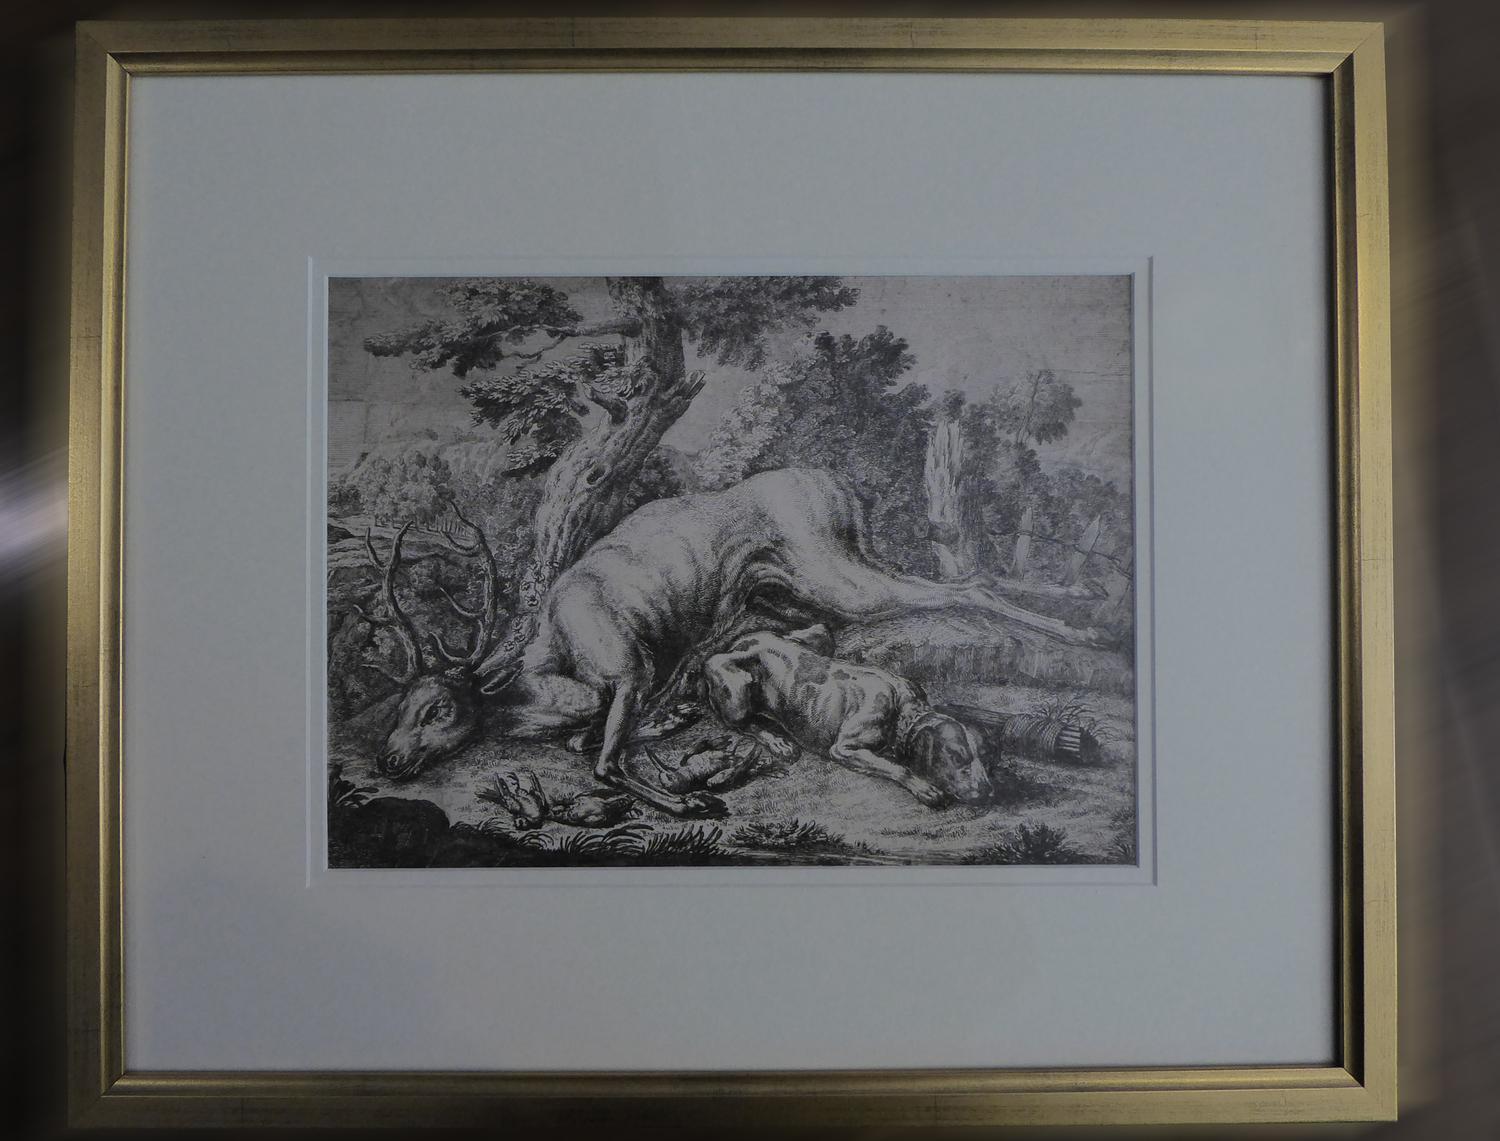 Fine 18th century engraving of a stag, after the hunt, with a magnificient dog at rest, in a country scene, beautifully depicted.